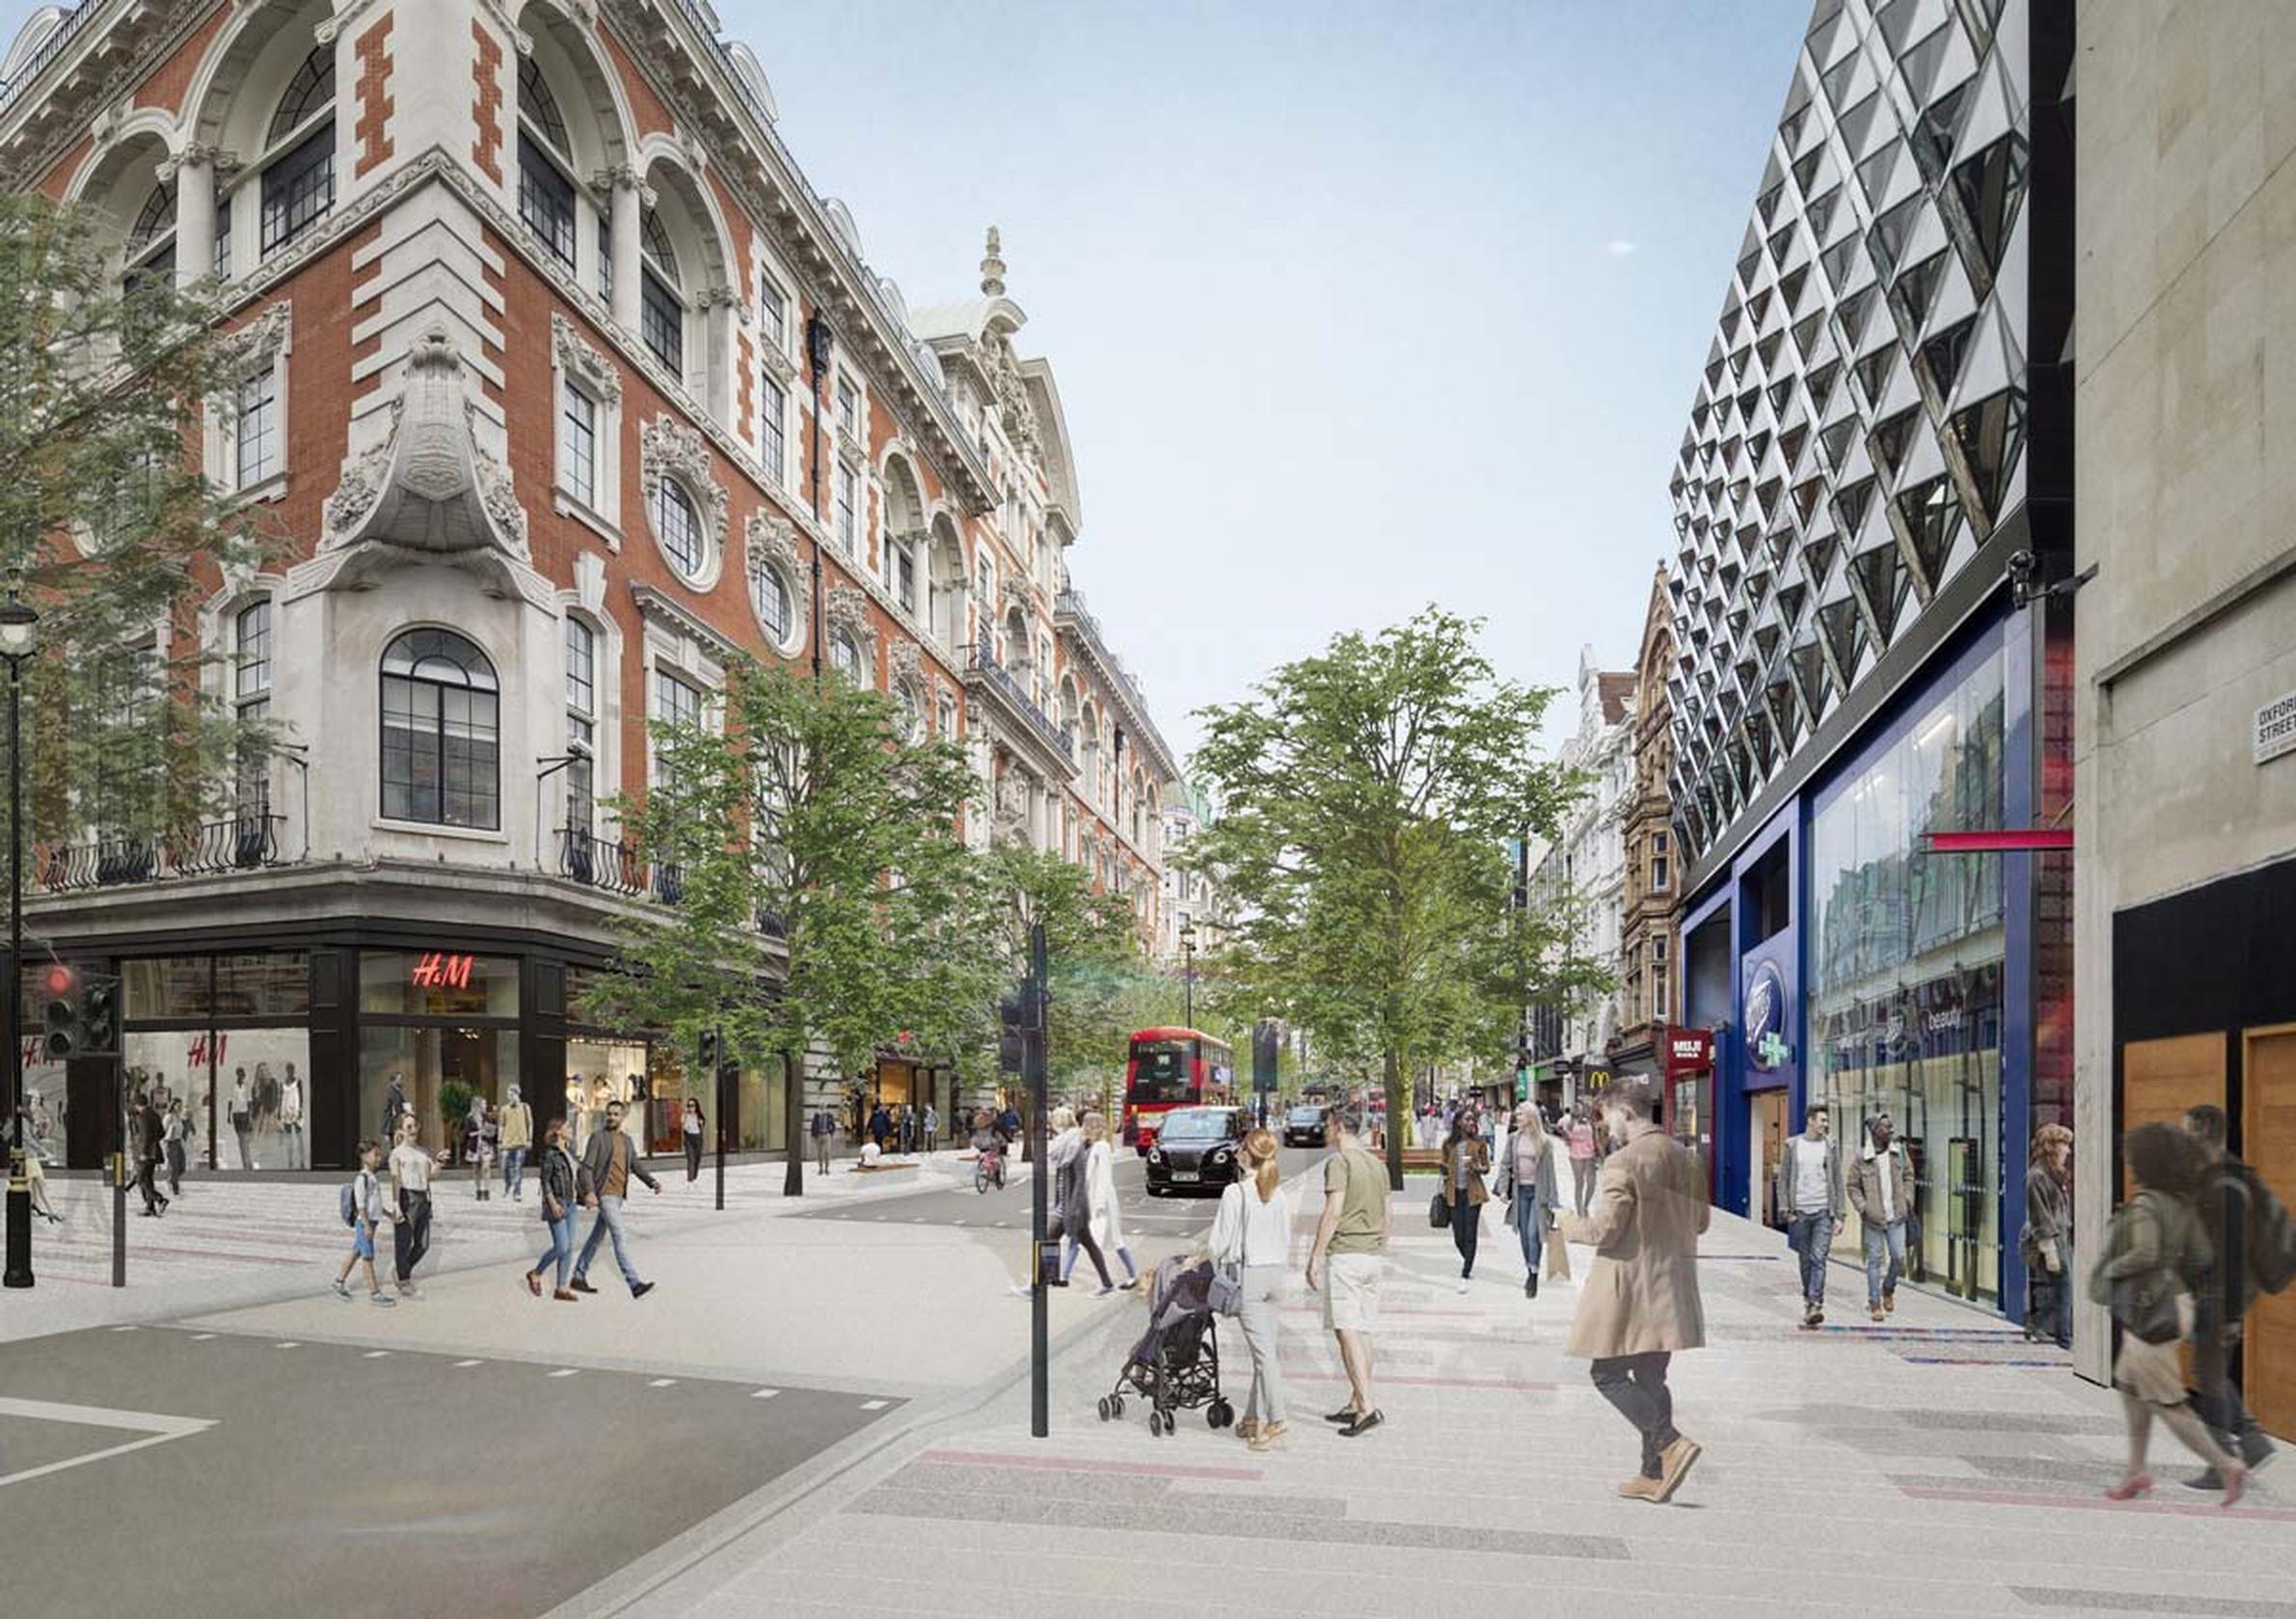 Westminster Council has pledged to make pavements wider and create ‘amenity places’ on Oxford Street